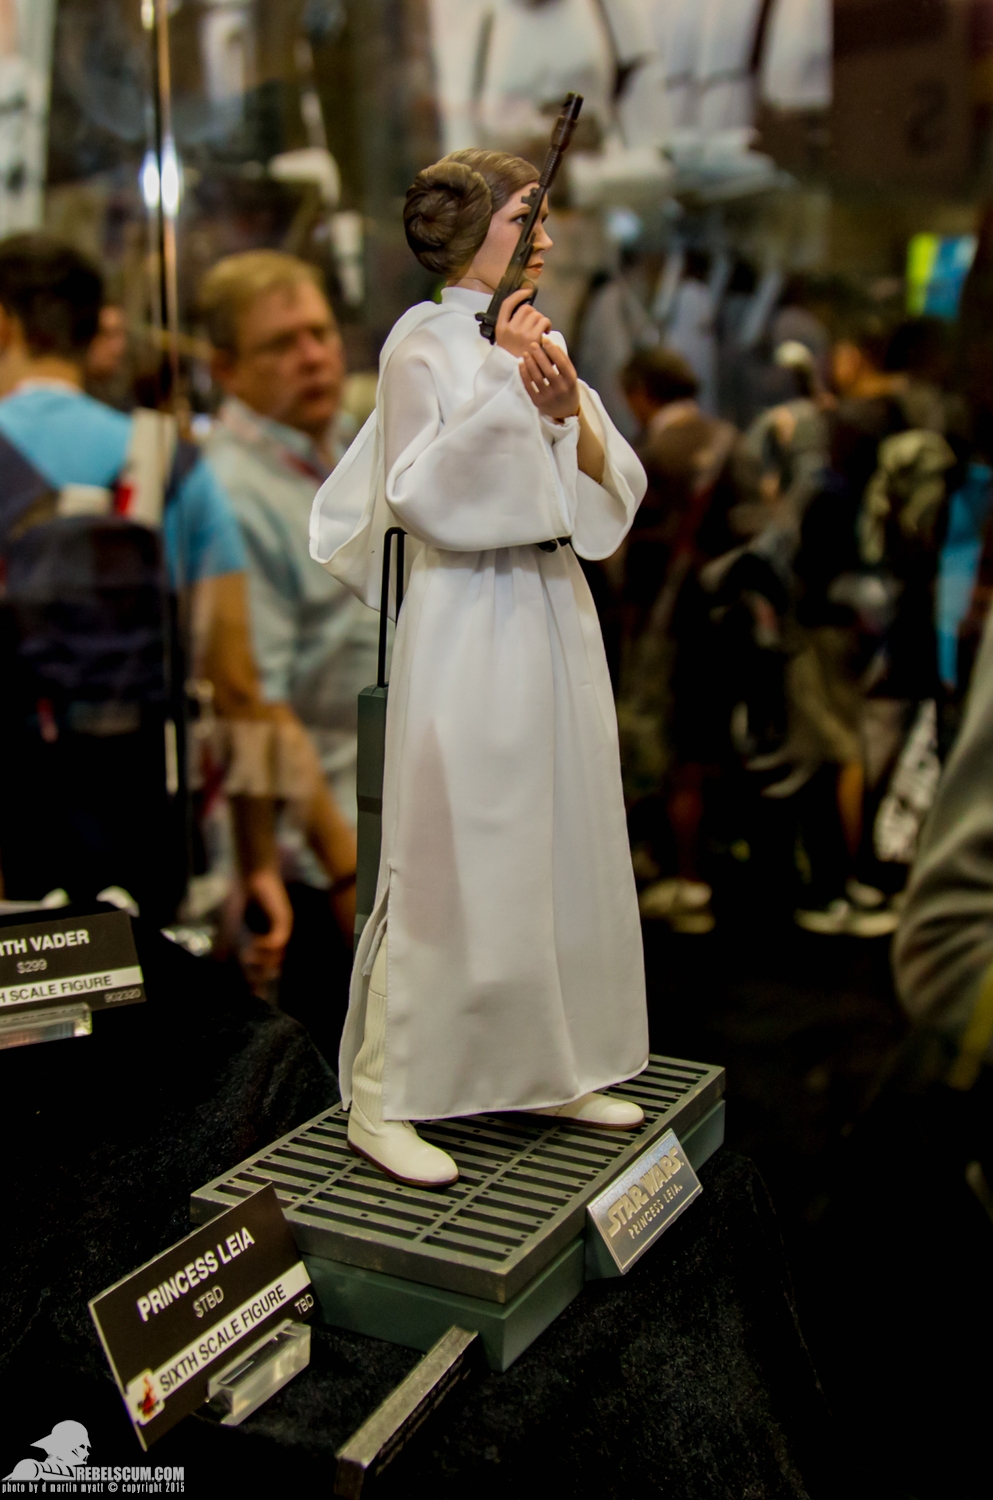 http://www.rebelscum.com/2015-SDCC/Hot-Toys-Display-2015-San-Diego-Comic-Con-SDCC/Hot-Toys-Display-2015-San-Diego-Comic-Con-SDCC-026.jpg